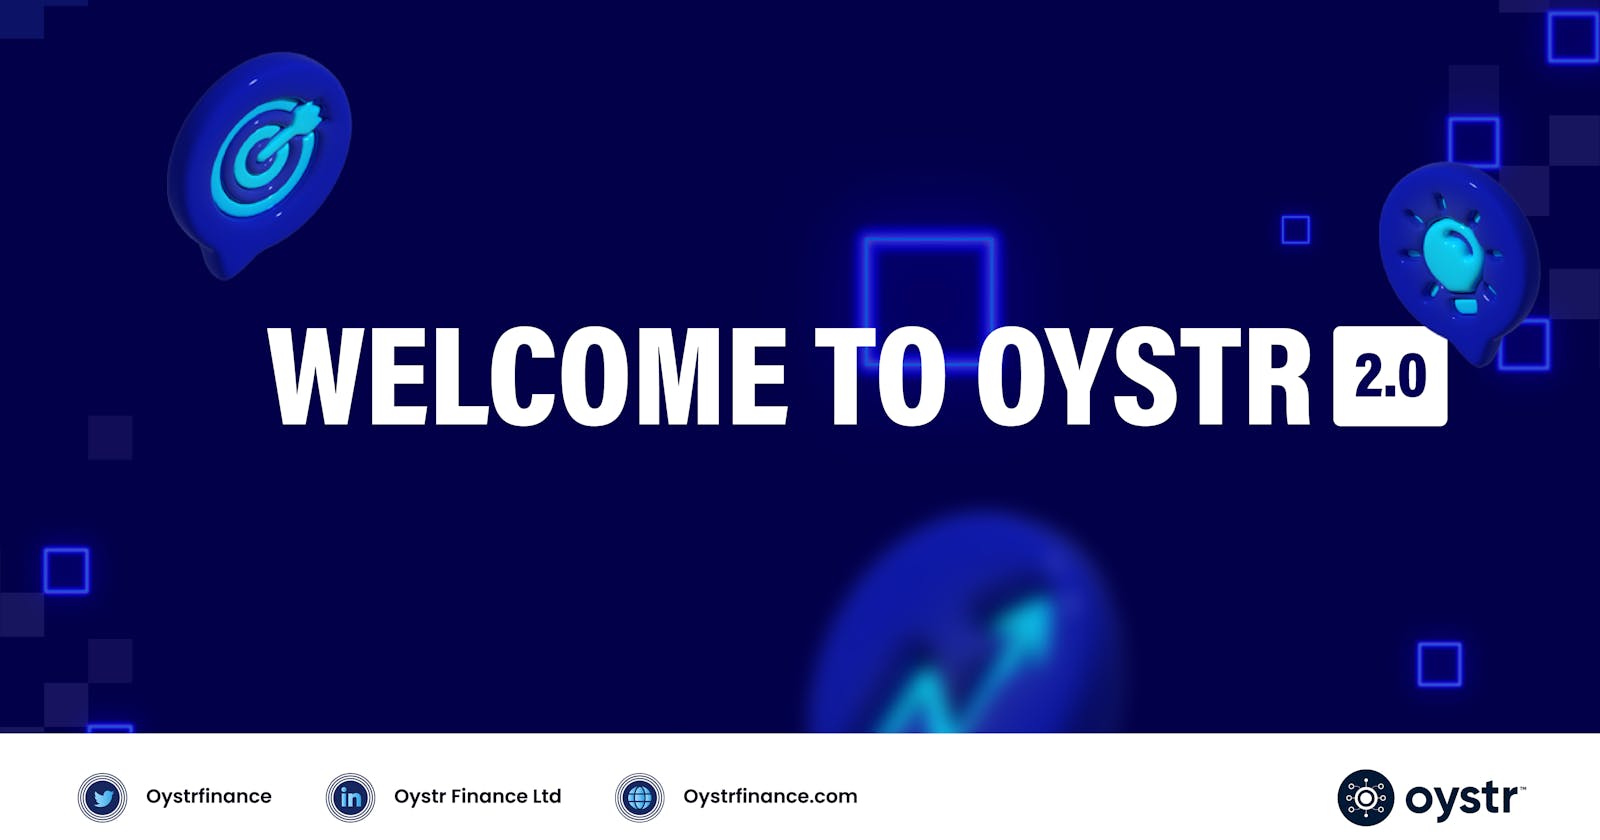 Welcome to Oystr 2.0: What’s new?